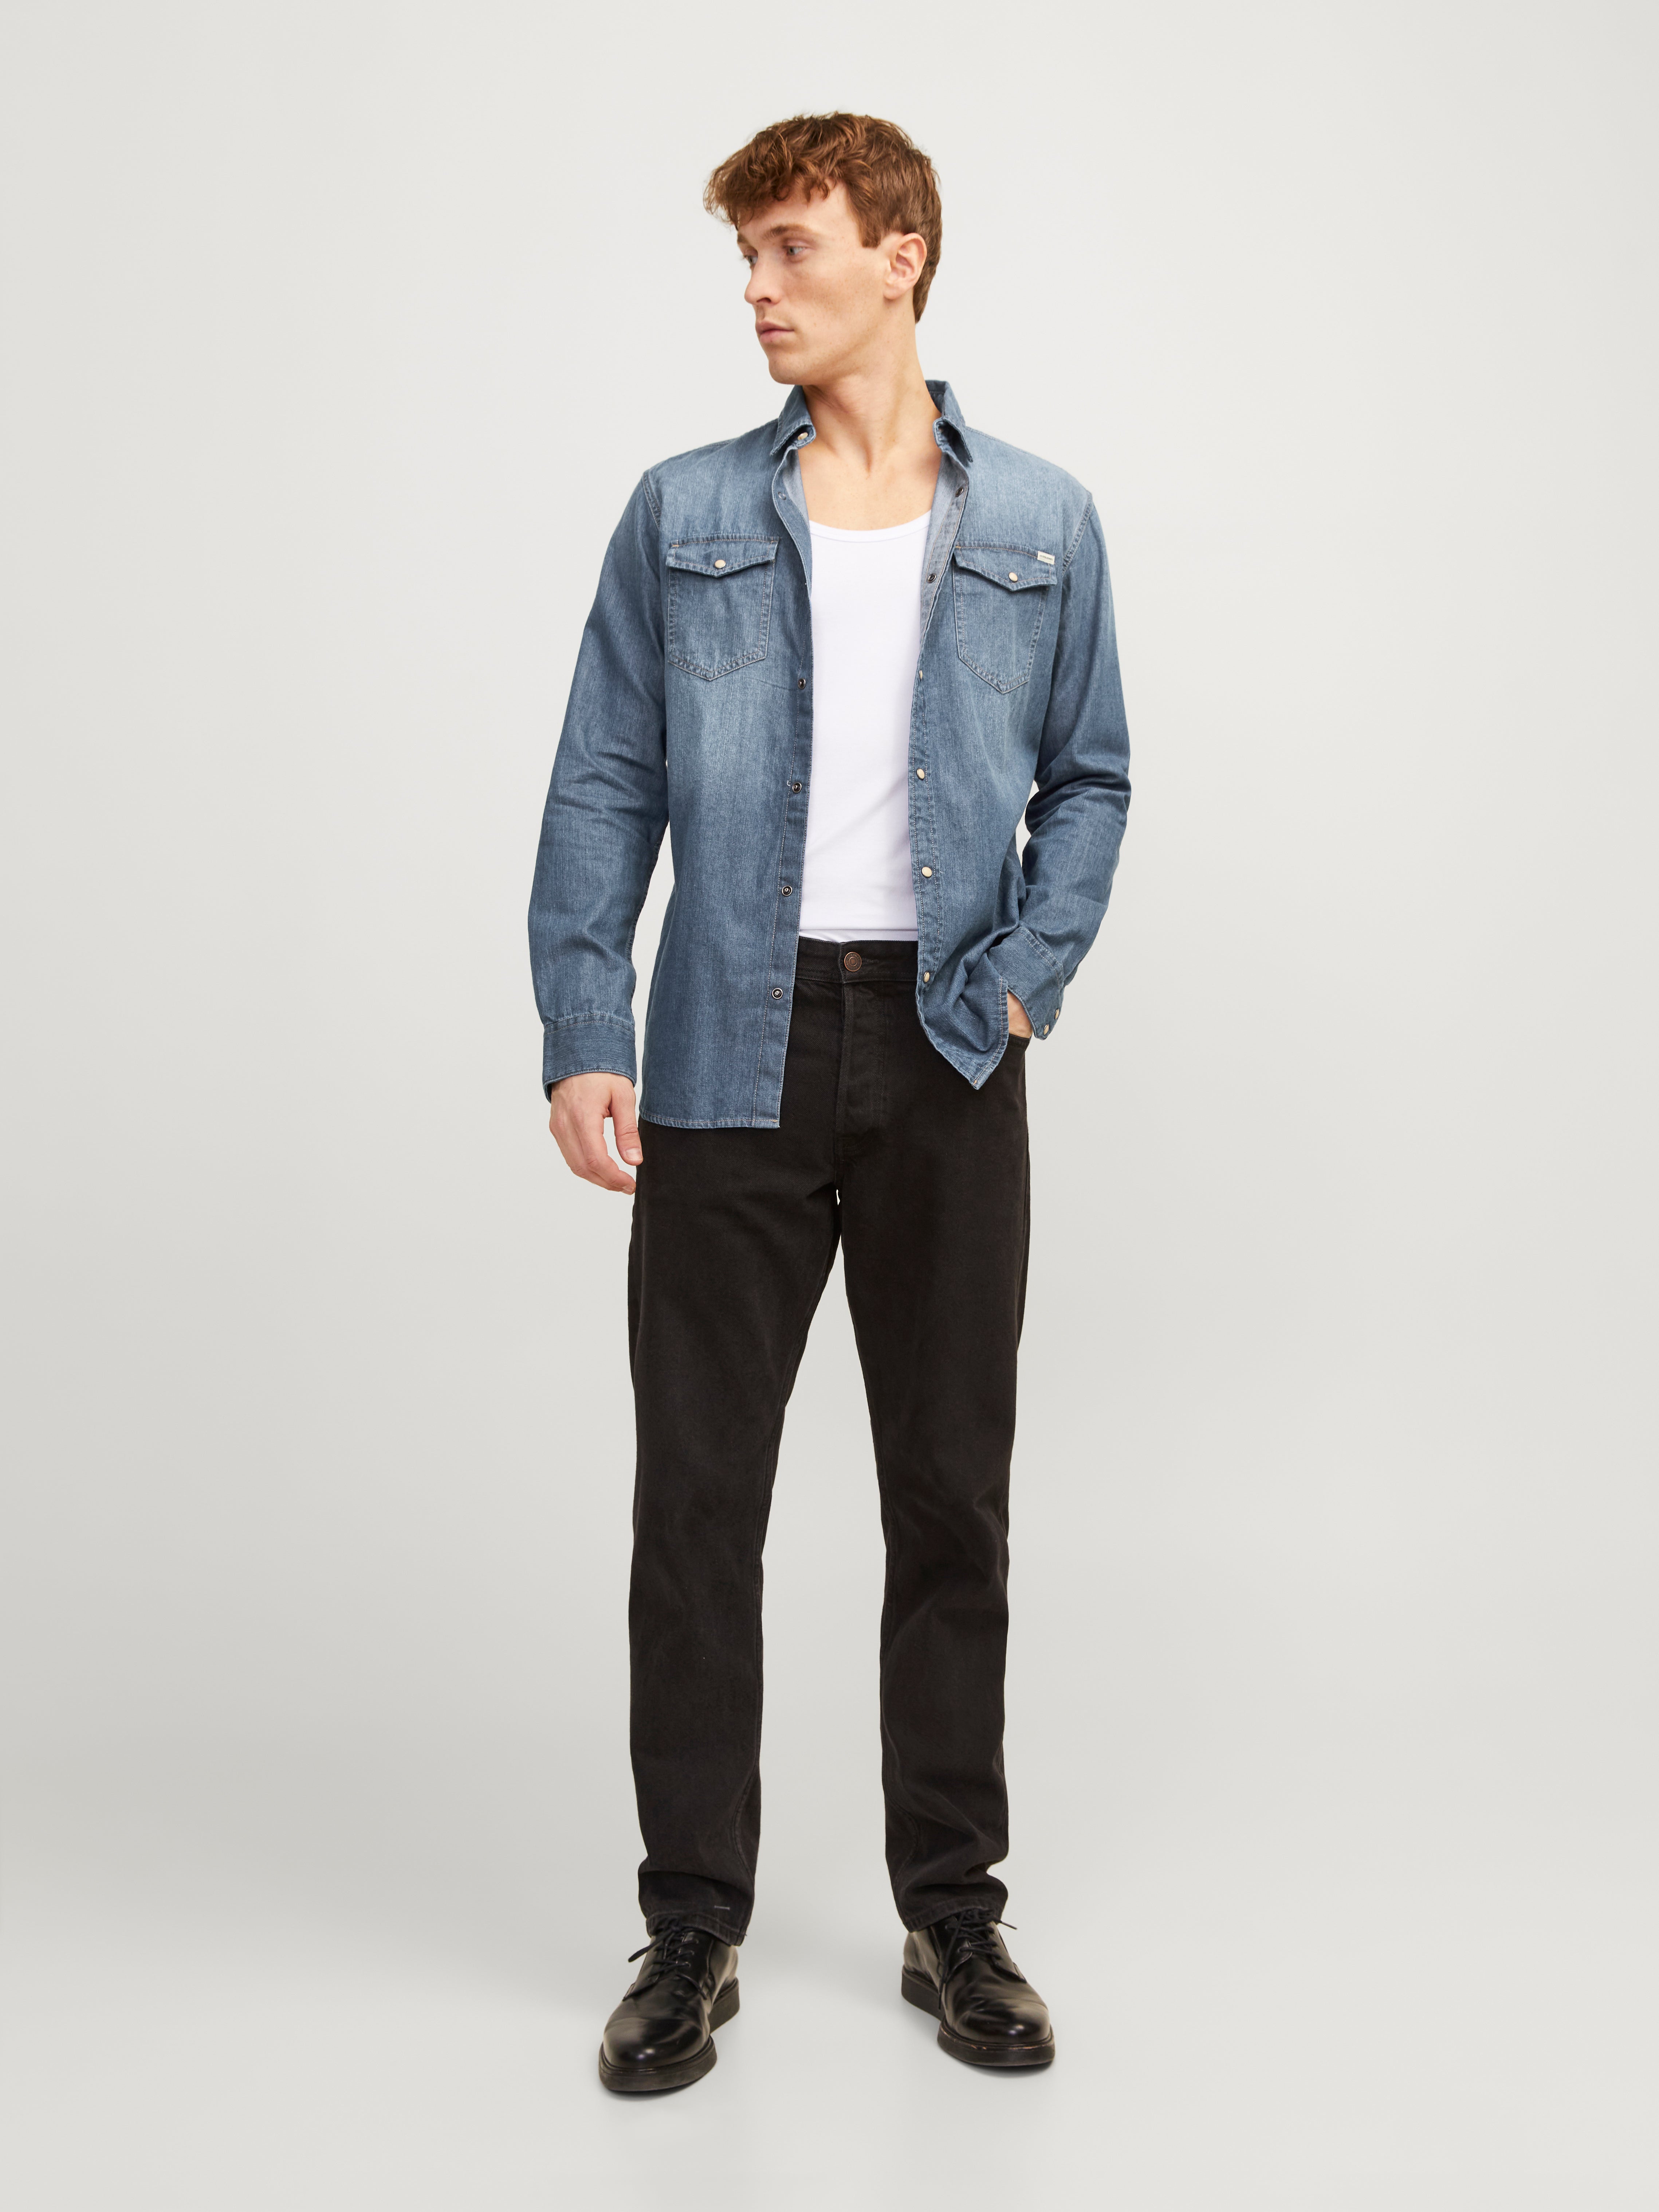 Which color jeans will go well with this blue denim shirt? - Quora